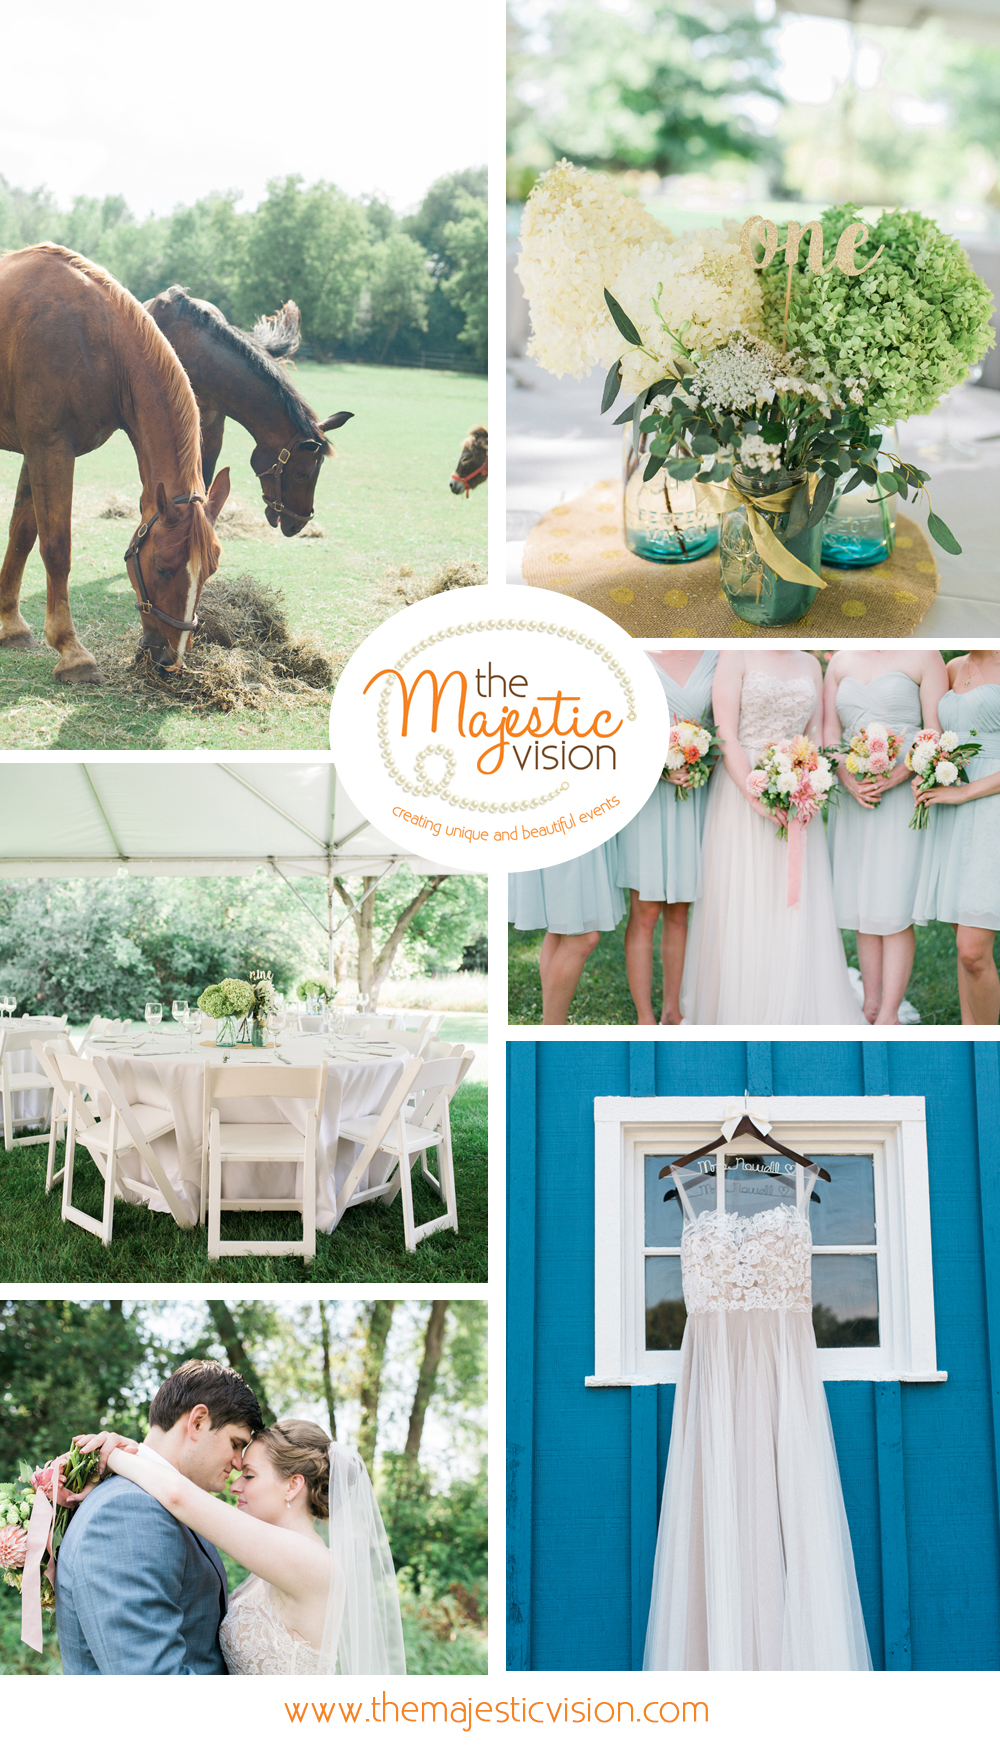 Romantic Mint and Serenity Blue Farm Wedding | The Majestic Vision Wedding Planning | Private Residence in Milwaukee, WI | www.themajesticvision.com | Elizabeth Haase Photography